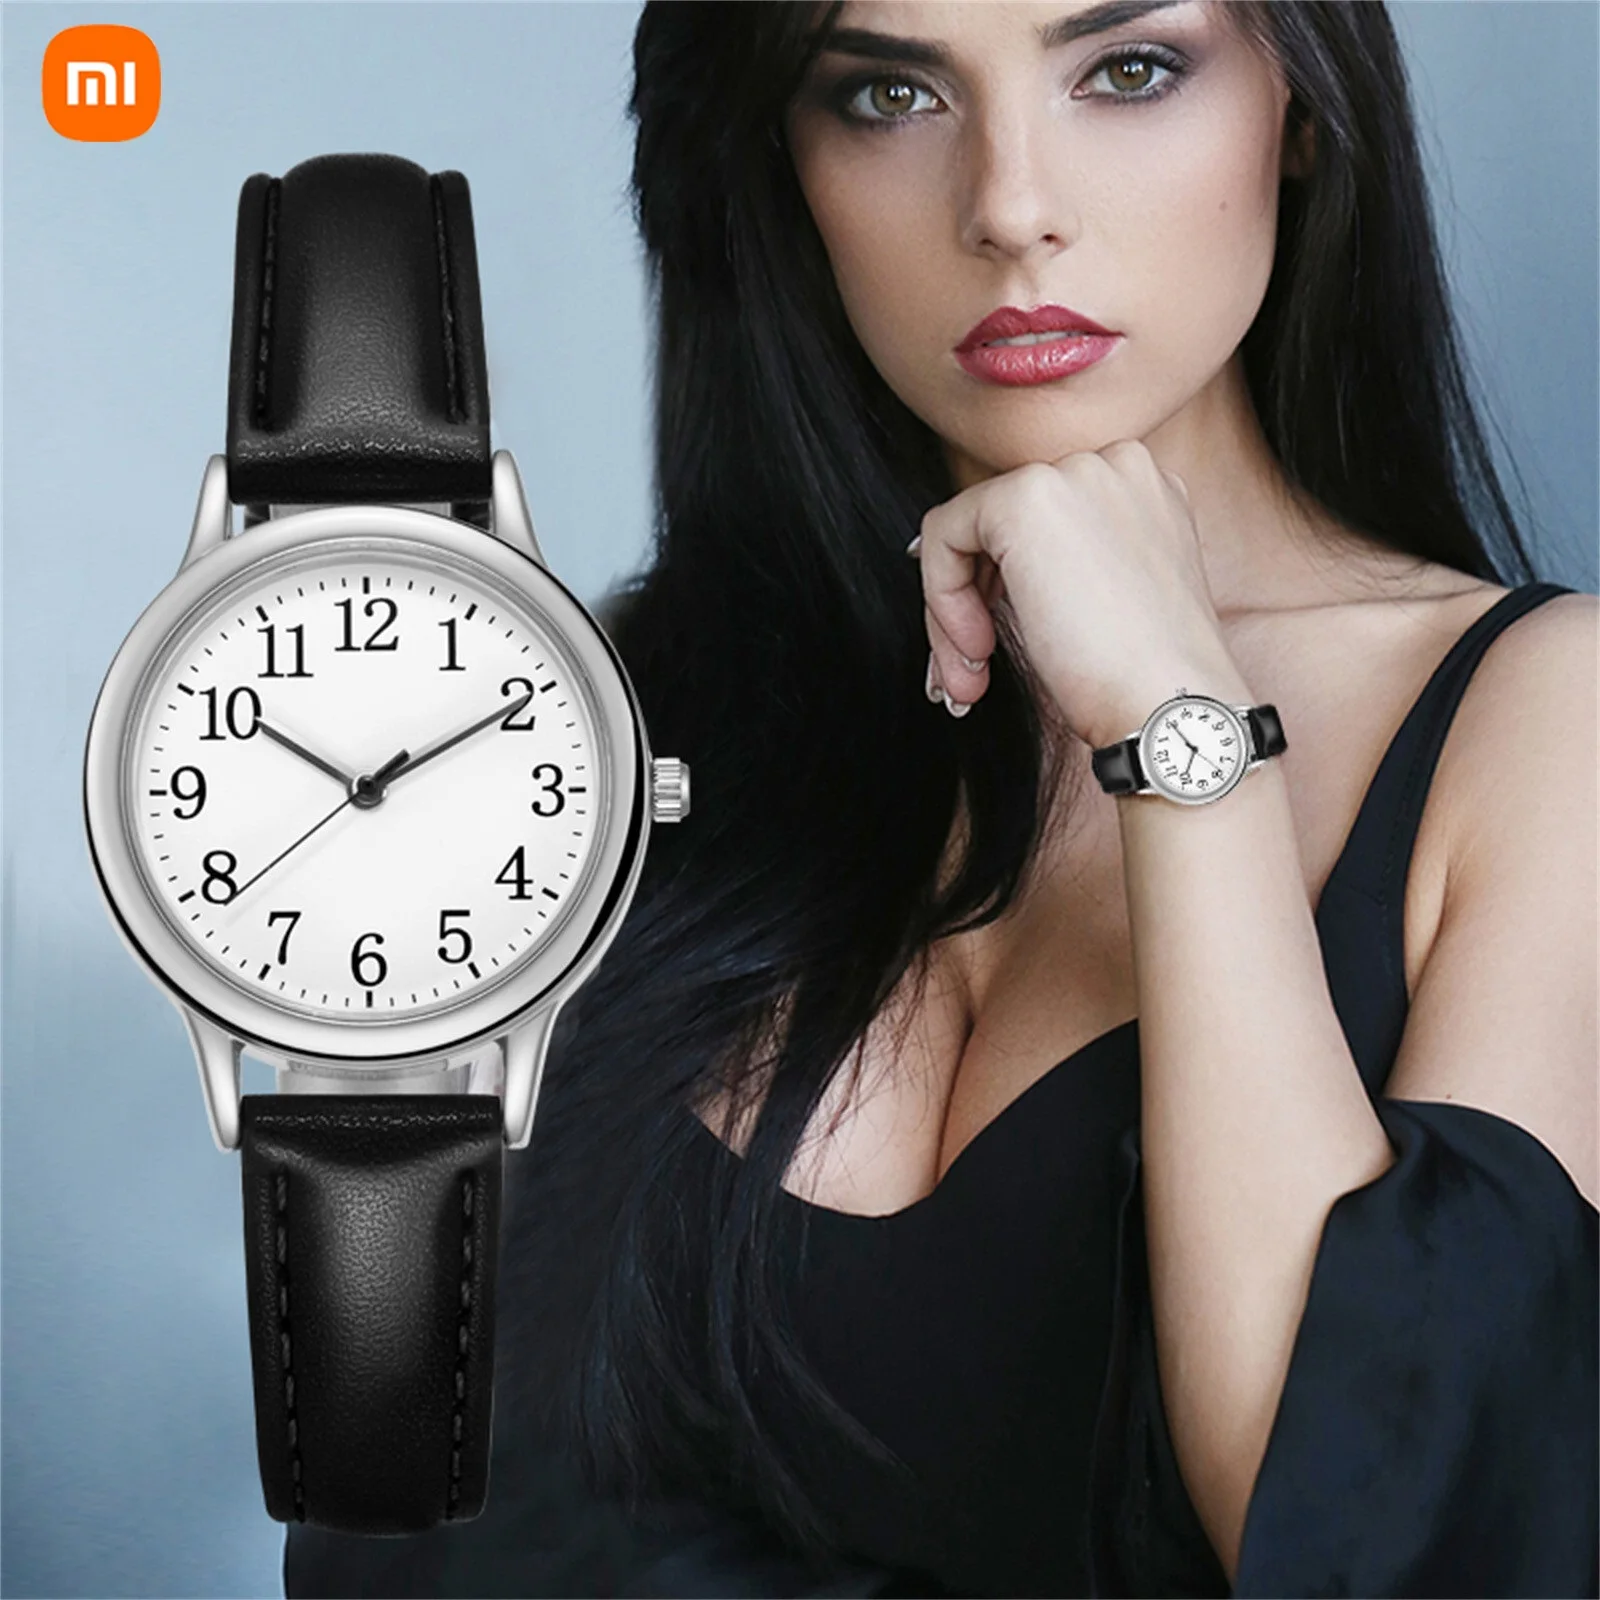 

Luxury Watch For Women Easy To Read Arabic Numerals Simple-dial Quartz Wristwatches Ladies Leather Strap Digital Watches Reloj